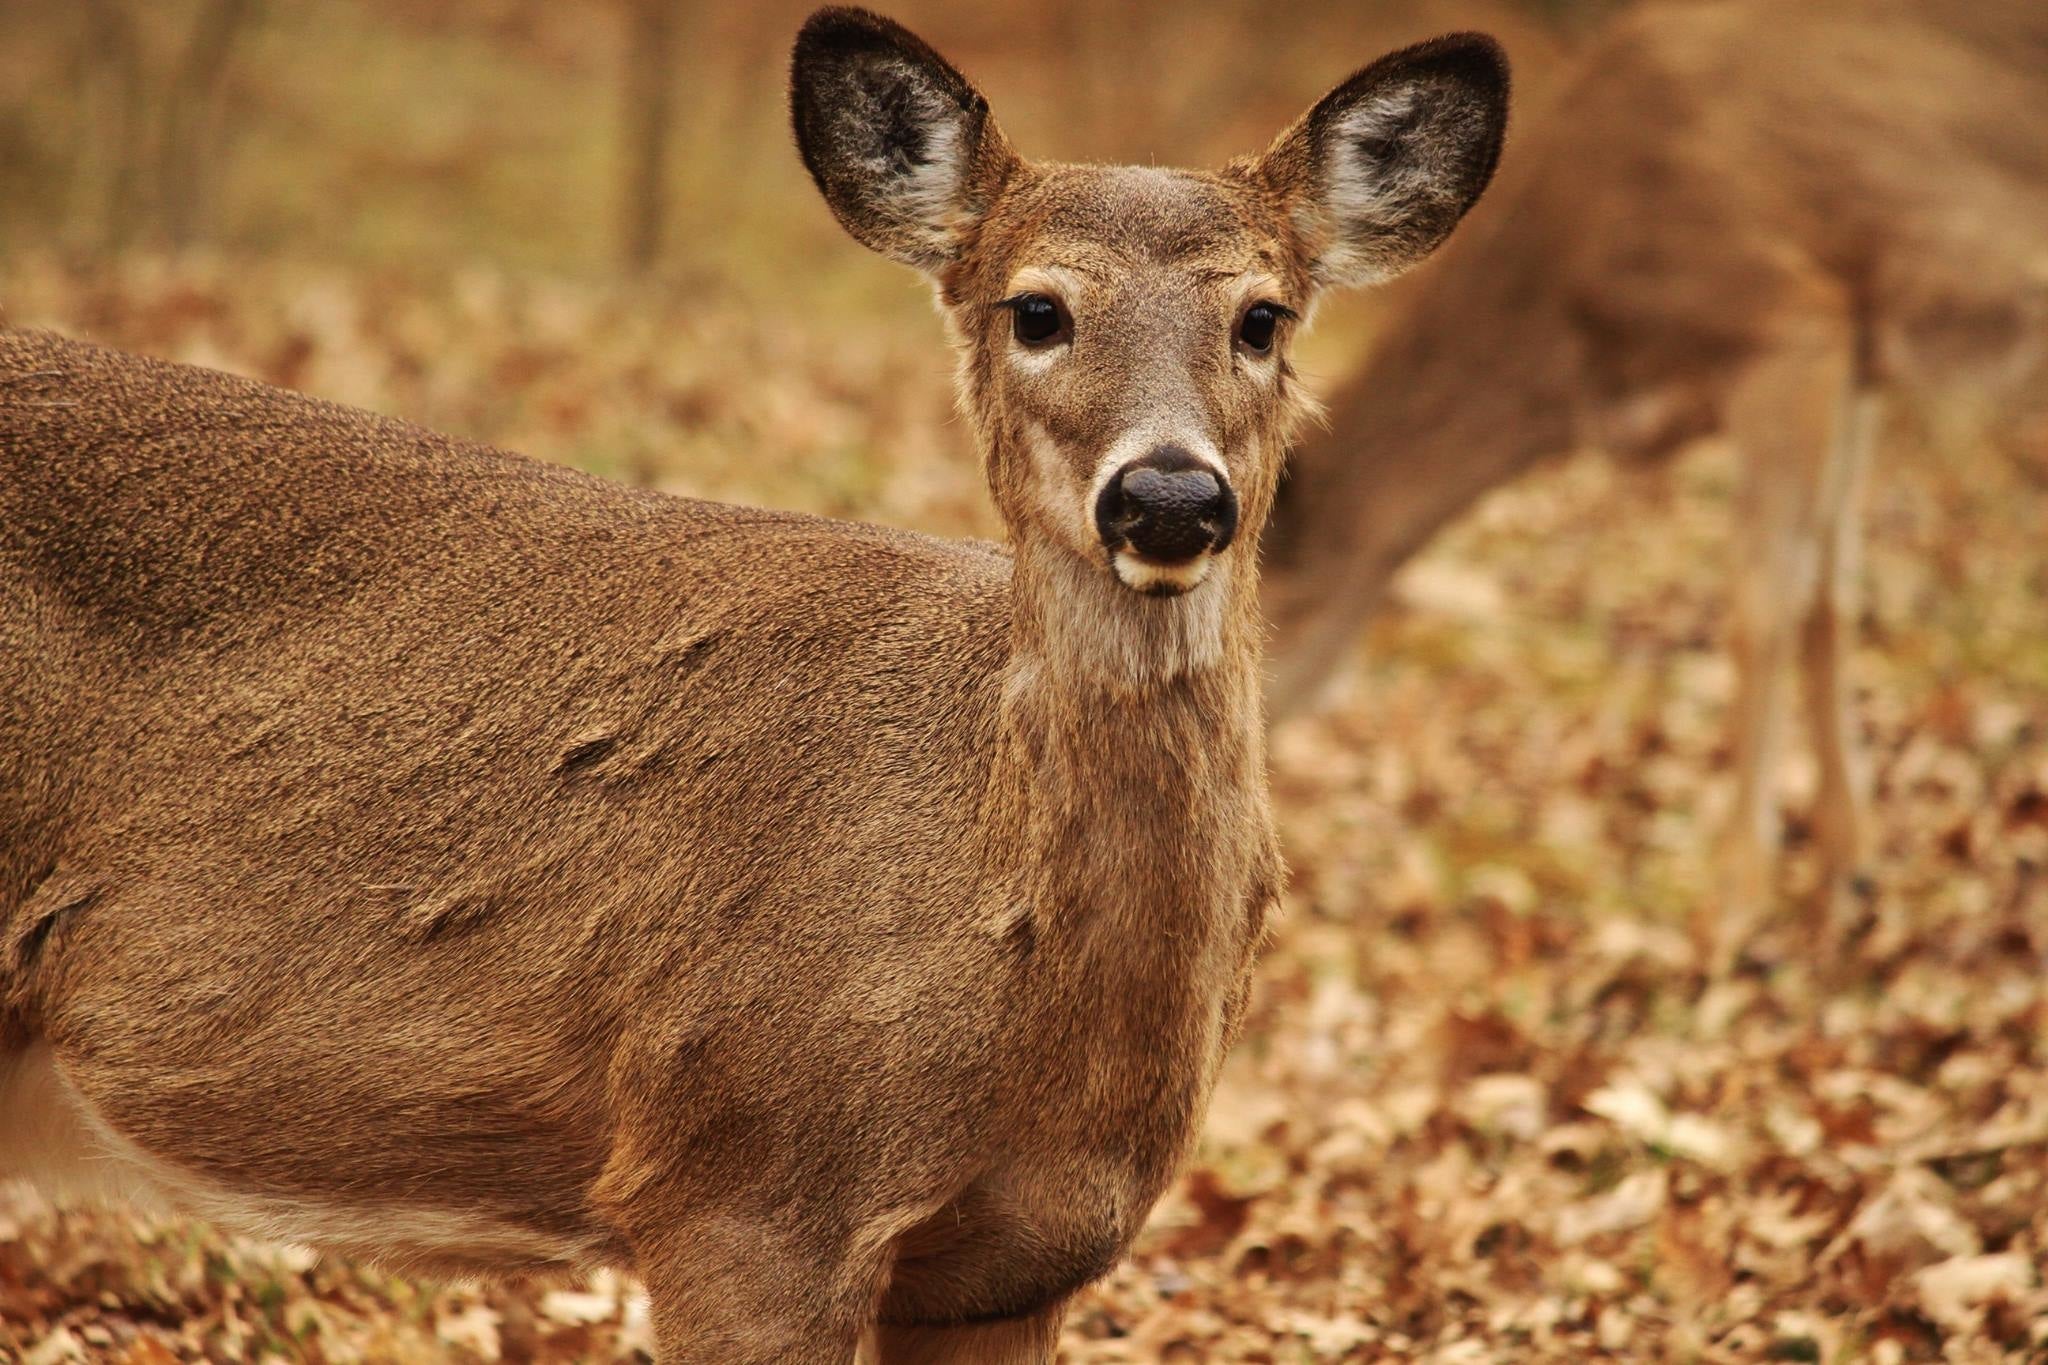 Biden Just Approved $10 Million in CWD Funding. It’s Still Not Enough